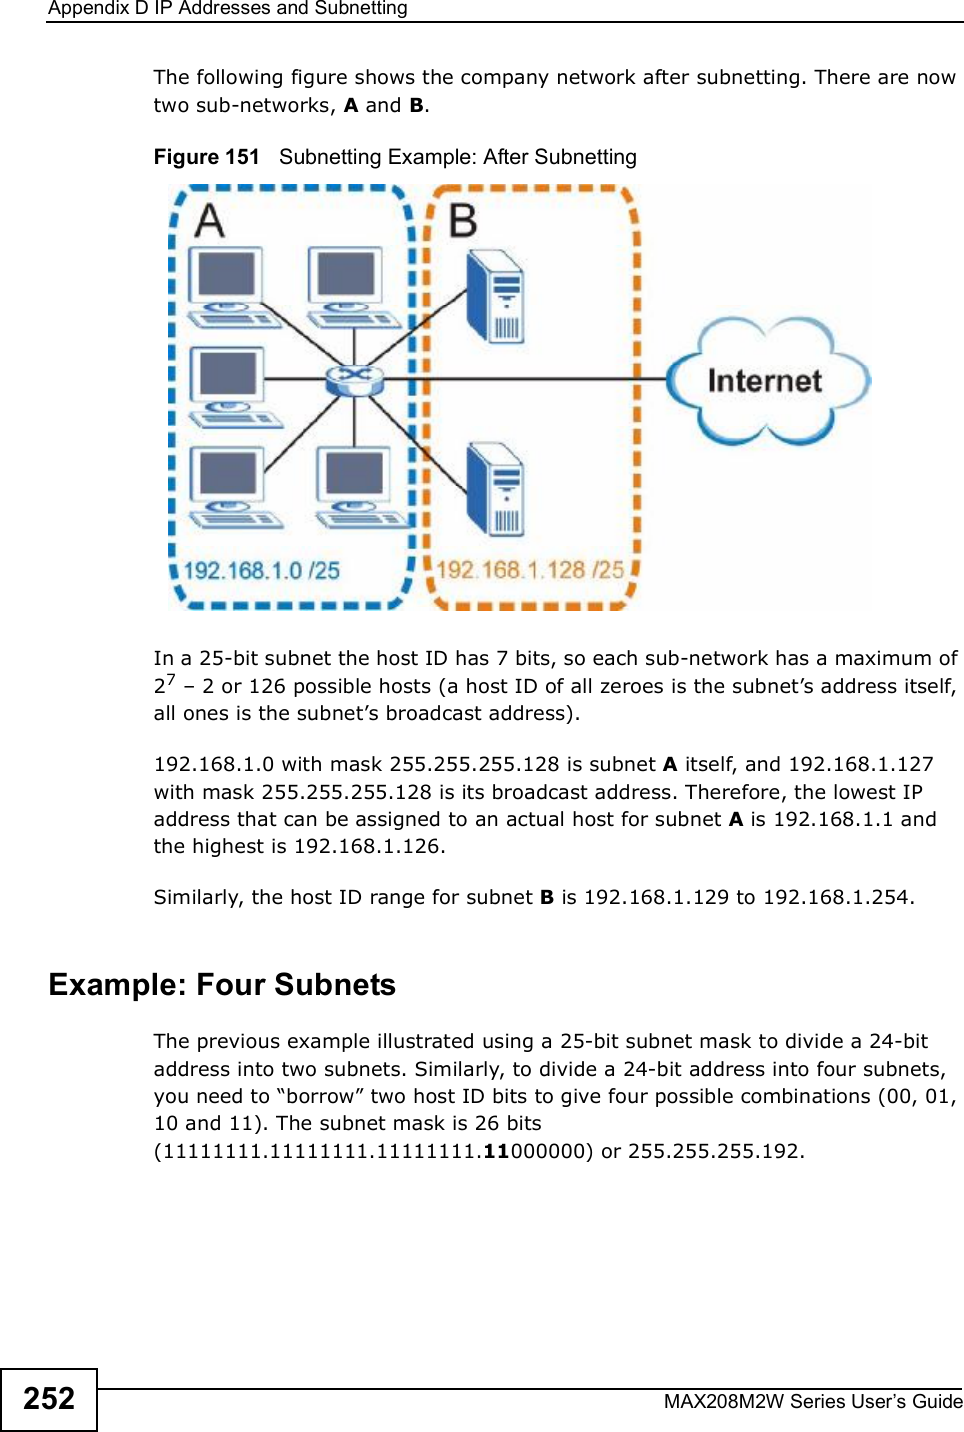 Appendix DIP Addresses and SubnettingMAX208M2W Series User s Guide252The following figure shows the company network after subnetting. There are now two sub-networks, A and B. Figure 151   Subnetting Example: After SubnettingIn a 25-bit subnet the host ID has 7 bits, so each sub-network has a maximum of 27 % 2 or 126 possible hosts (a host ID of all zeroes is the subnet s address itself, all ones is the subnet s broadcast address).192.168.1.0 with mask 255.255.255.128 is subnet A itself, and 192.168.1.127 with mask 255.255.255.128 is its broadcast address. Therefore, the lowest IP address that can be assigned to an actual host for subnet A is 192.168.1.1 and the highest is 192.168.1.126. Similarly, the host ID range for subnet B is 192.168.1.129 to 192.168.1.254.Example: Four Subnets The previous example illustrated using a 25-bit subnet mask to divide a 24-bit address into two subnets. Similarly, to divide a 24-bit address into four subnets, you need to &quot;borrow# two host ID bits to give four possible combinations (00, 01, 10 and 11). The subnet mask is 26 bits (11111111.11111111.11111111.11000000) or 255.255.255.192. 